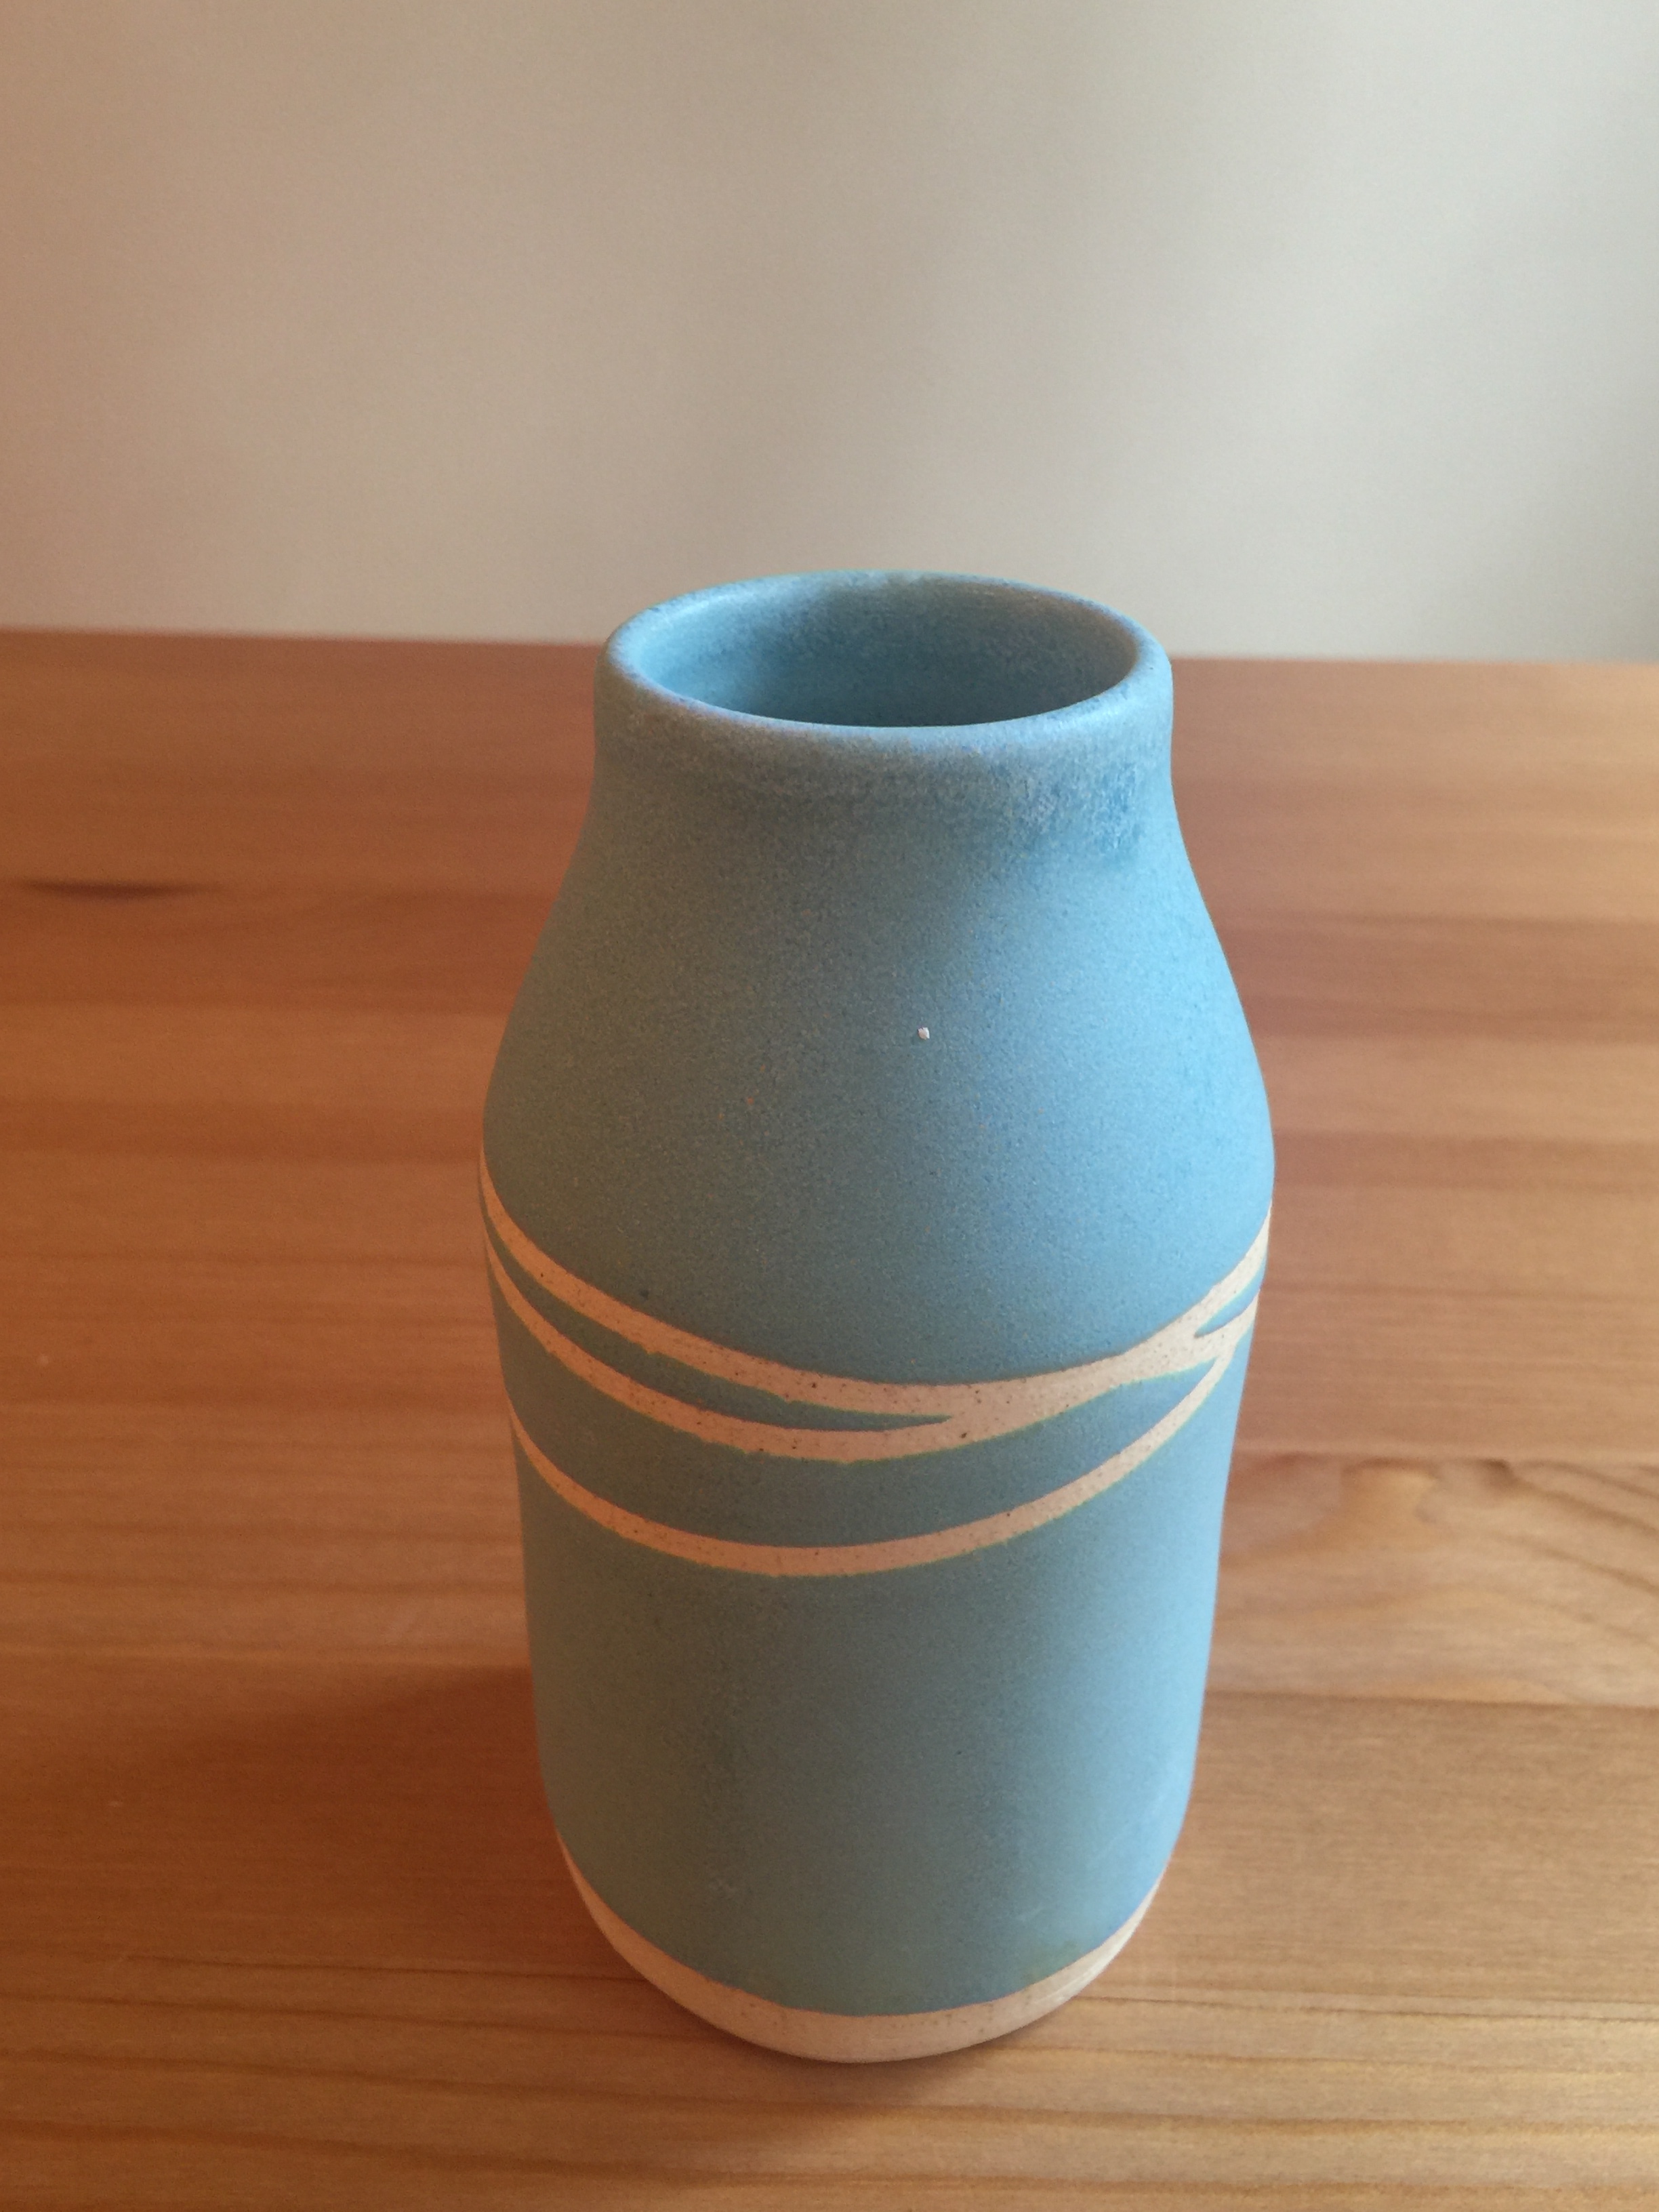 small vase: teal glaze with raw clay resist design